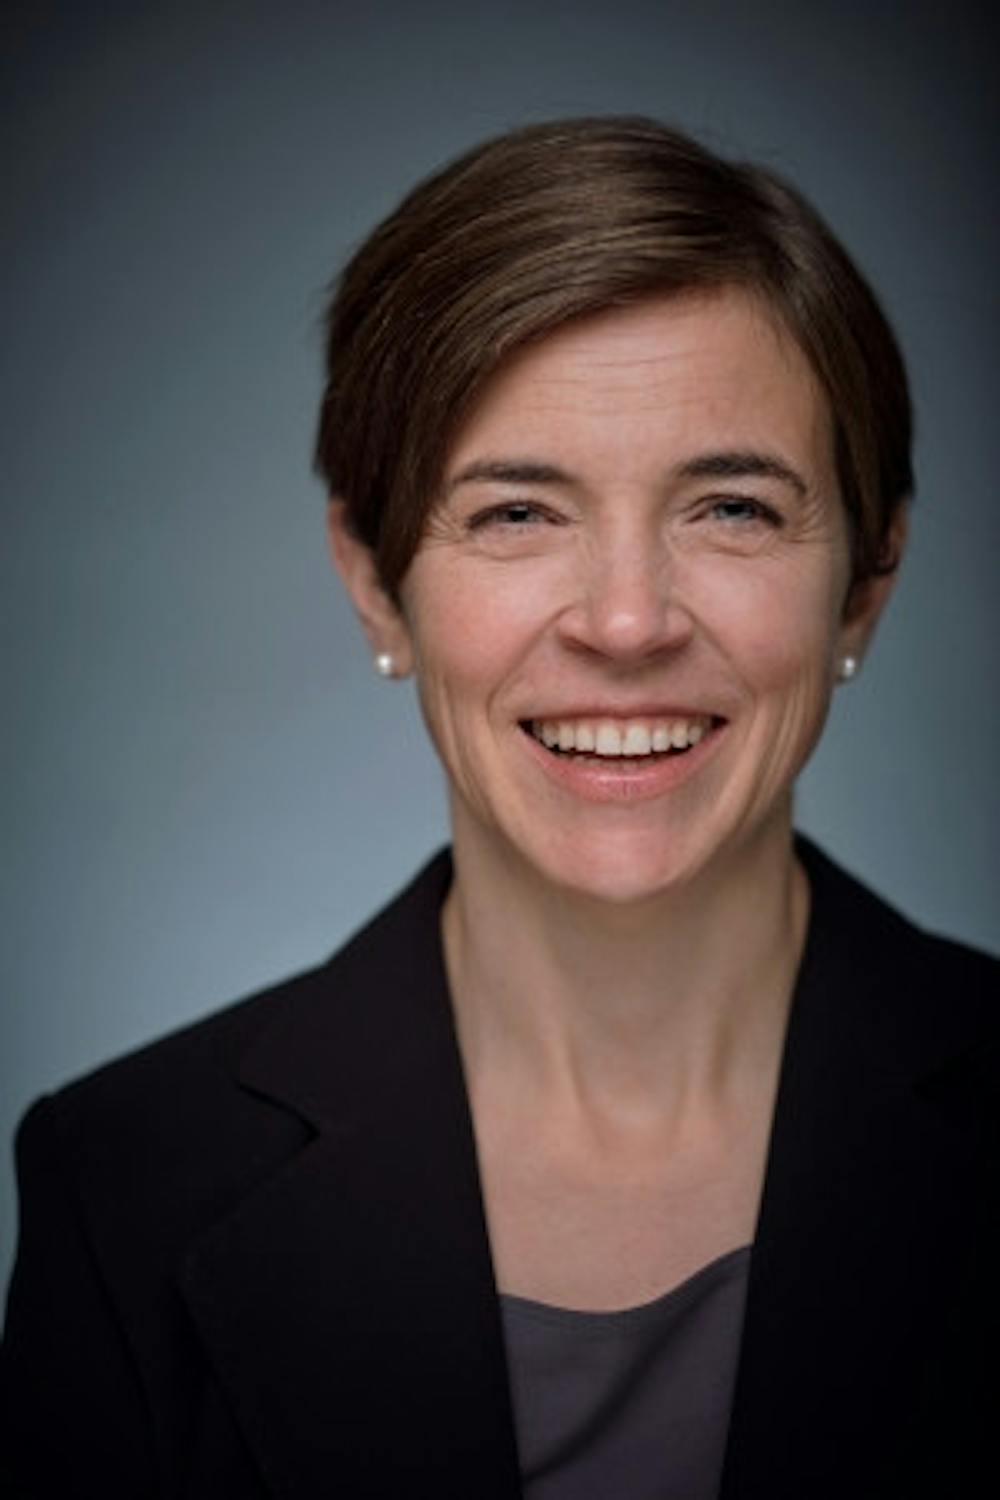 <span class="photocreditinline">COURTESY PHOTO</span><br />Political Science professor Sarah Stroup, the faculty head of the training program and one of the professors who spear-headed the grant application.